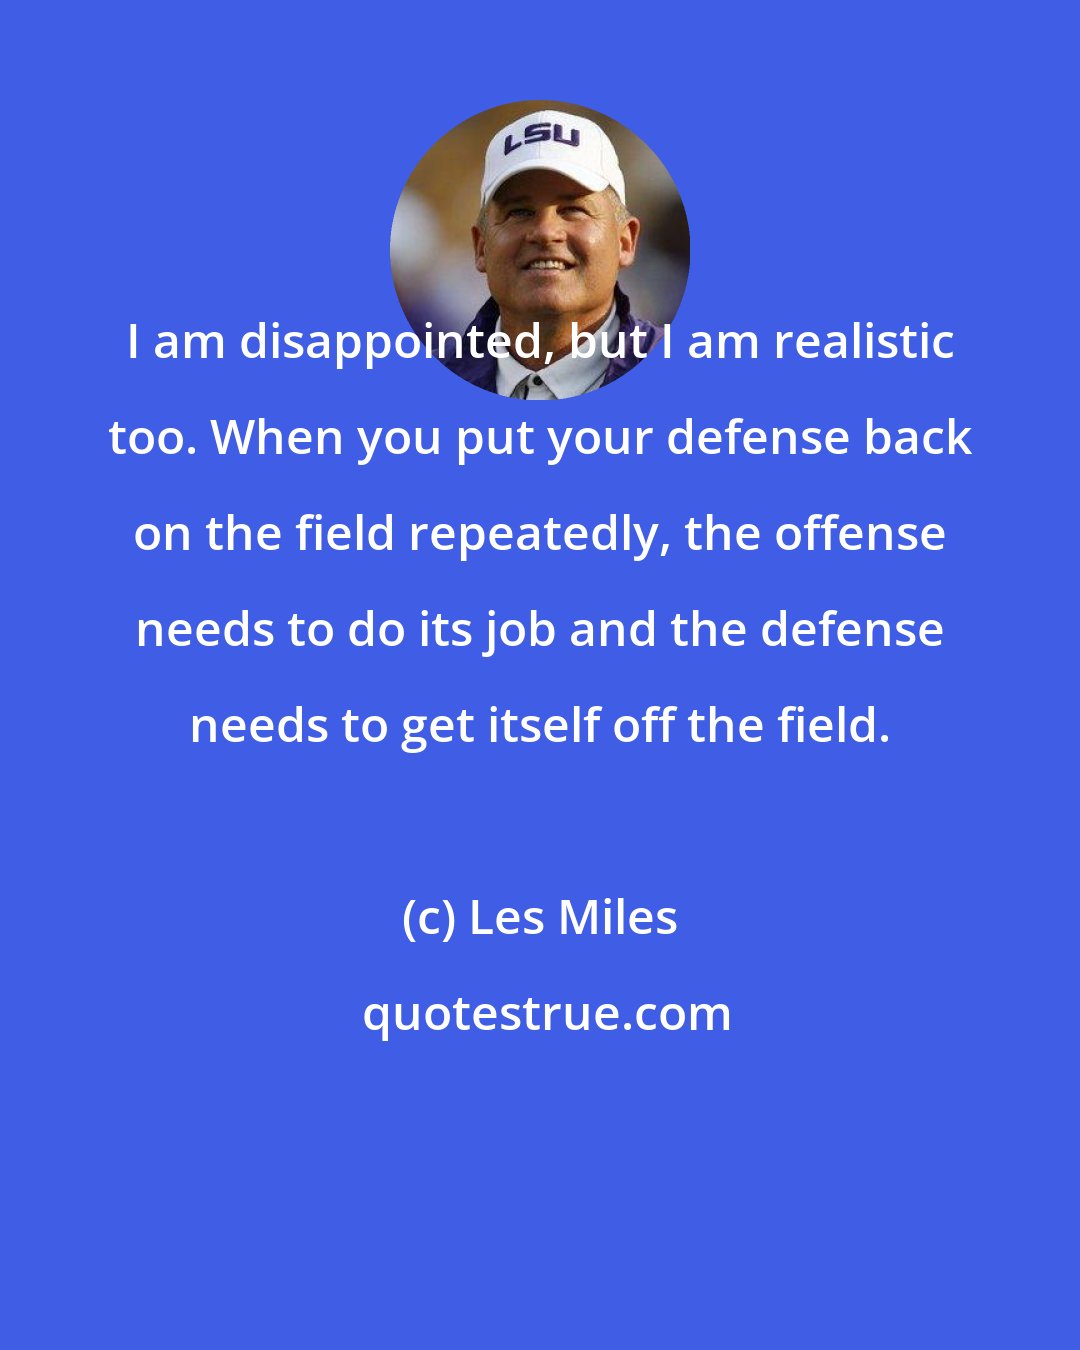 Les Miles: I am disappointed, but I am realistic too. When you put your defense back on the field repeatedly, the offense needs to do its job and the defense needs to get itself off the field.